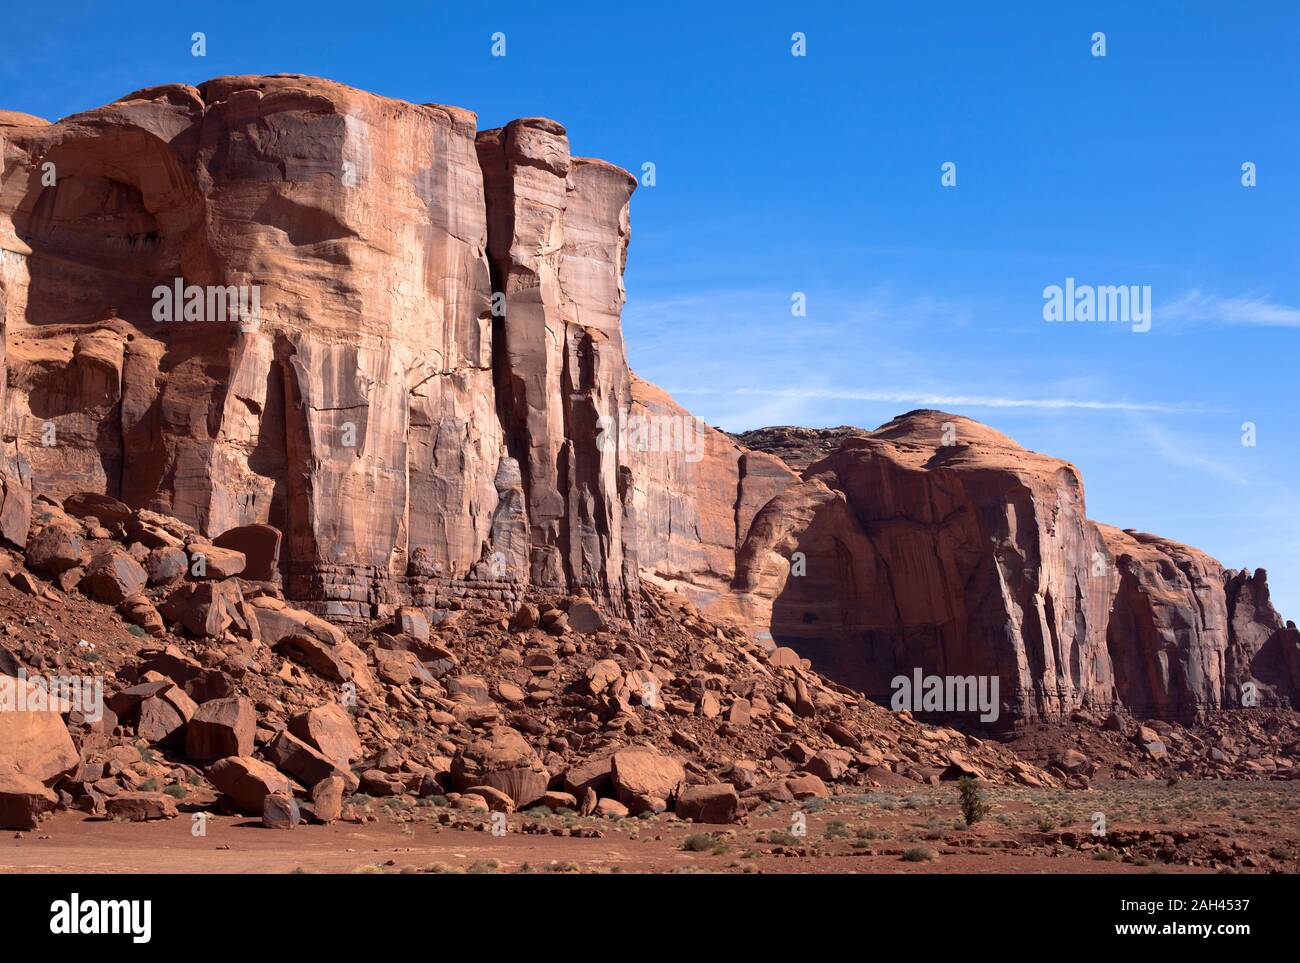 USA, Arizona, Brown rock wall in Monument Valley Stock Photo